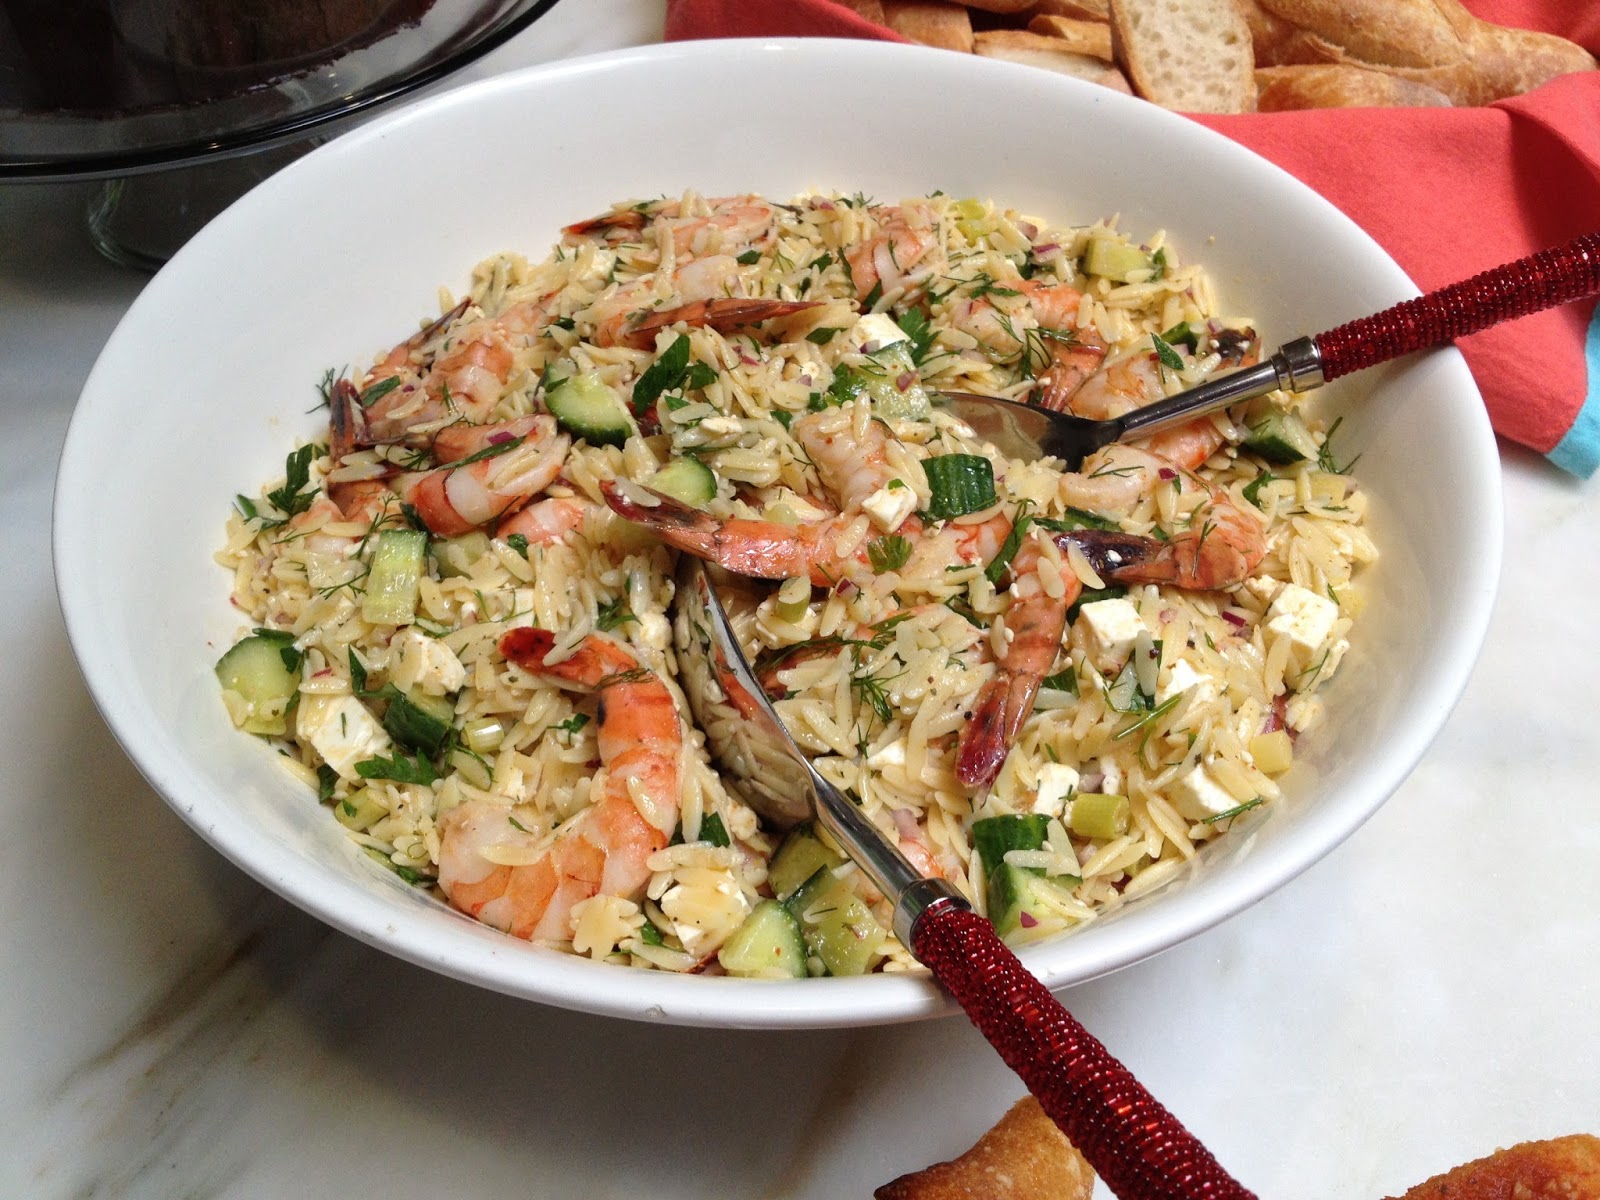 Two Salads Adapted From Ina Garten Roasted Shrimp And Orzo And Beets With Orange Vinaigrette C H E W I N G T H E F A T